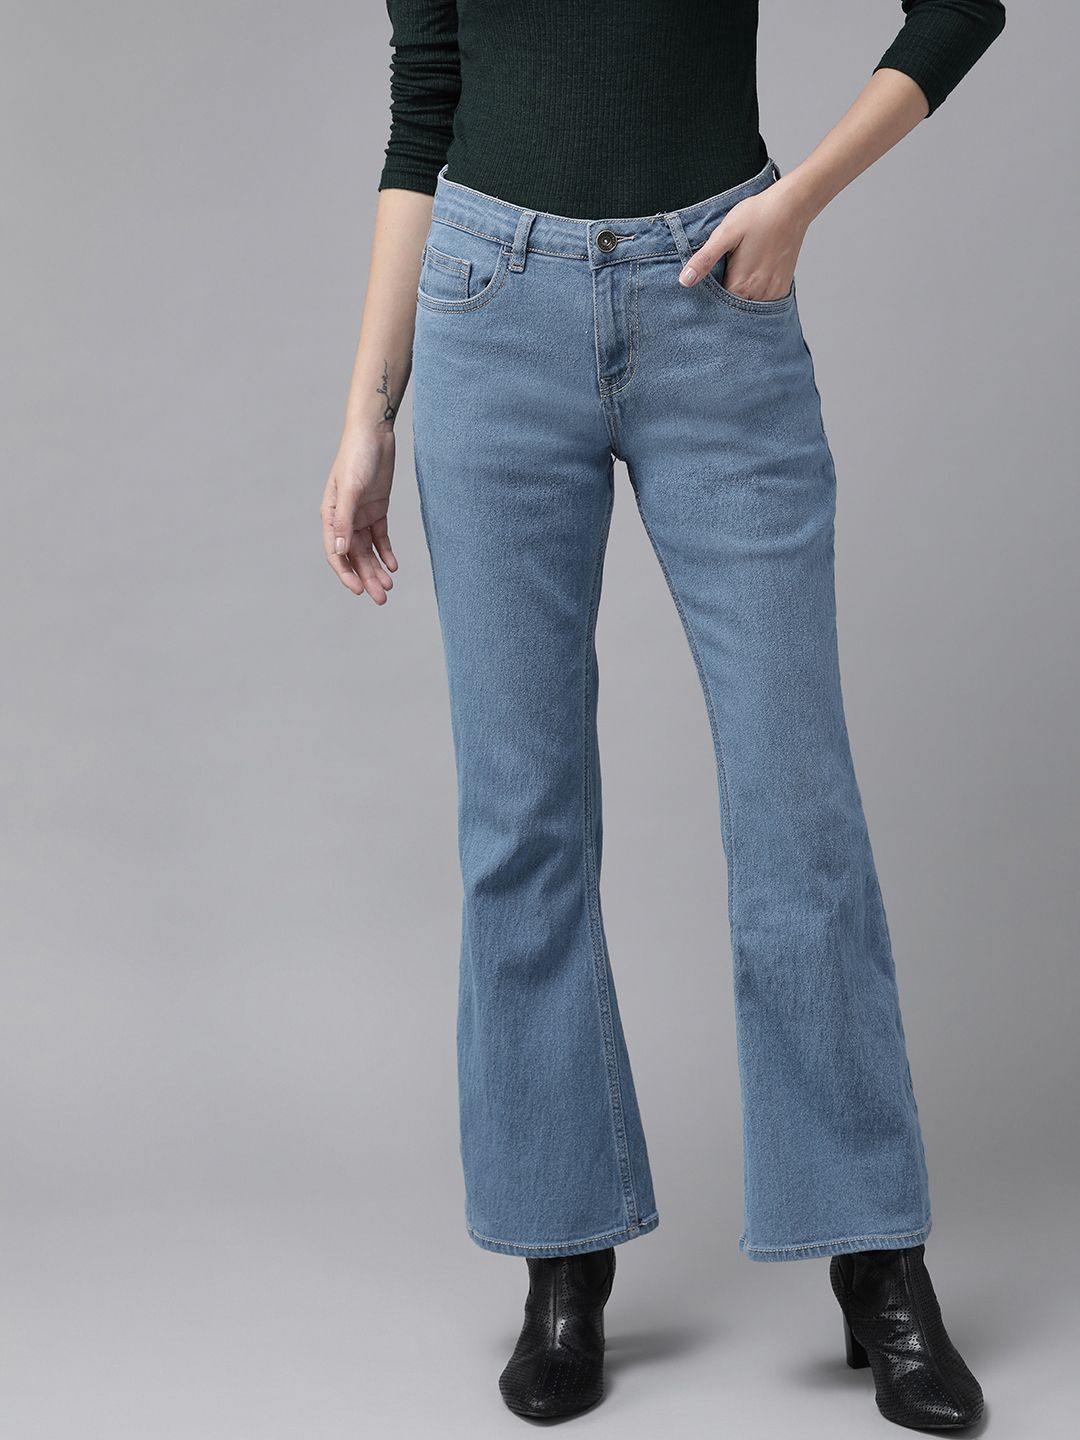 Roadster Women Blue Flared Stretchable Jeans Price in India